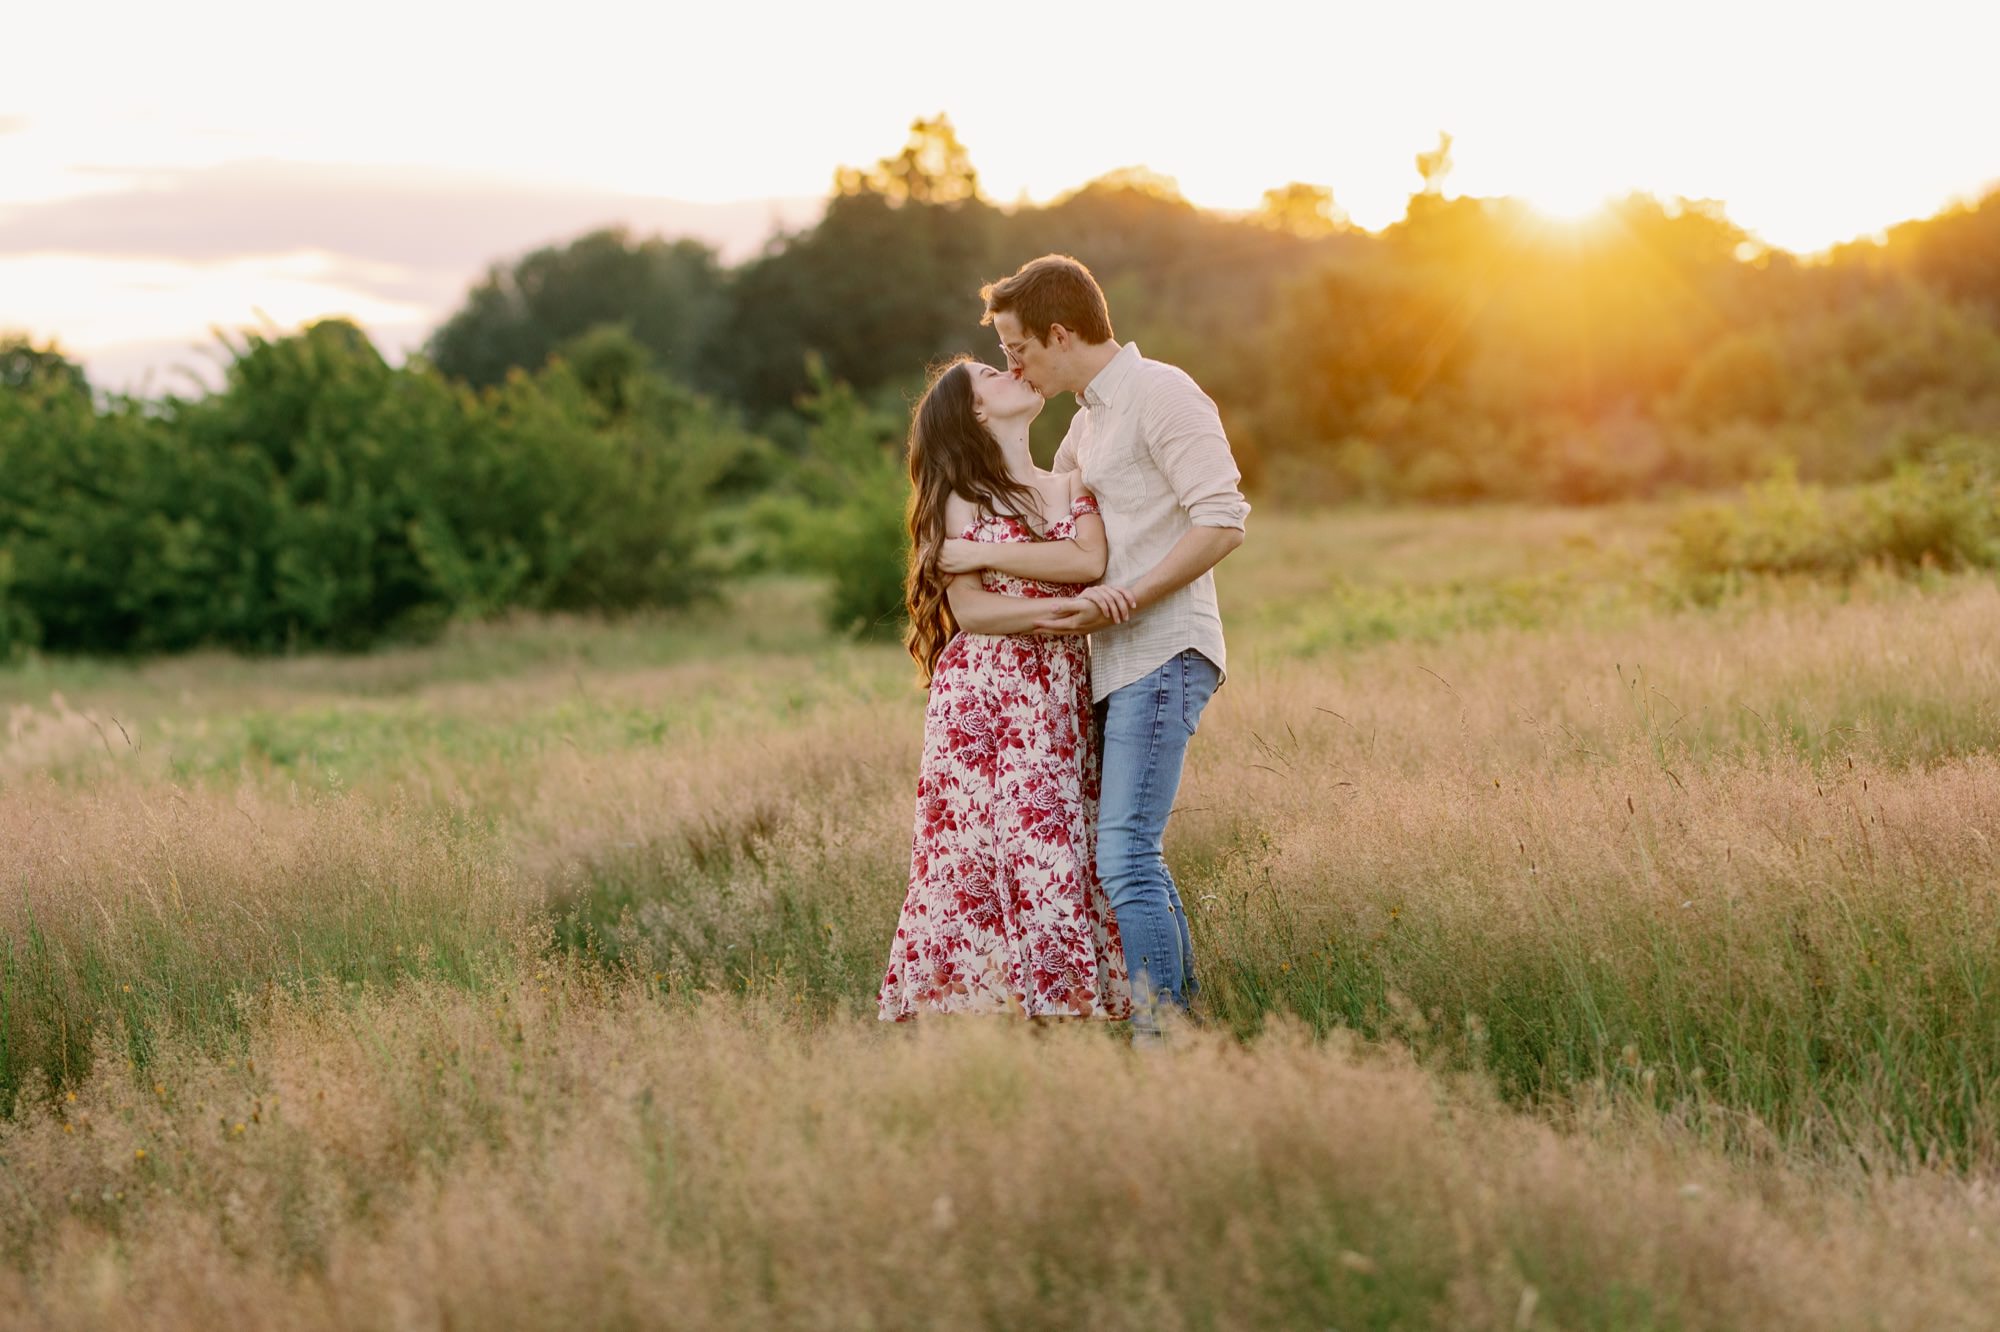 A couple sharing a kiss in a grassy field at sunset, with the woman in a floral dress and the man in a light shirt.